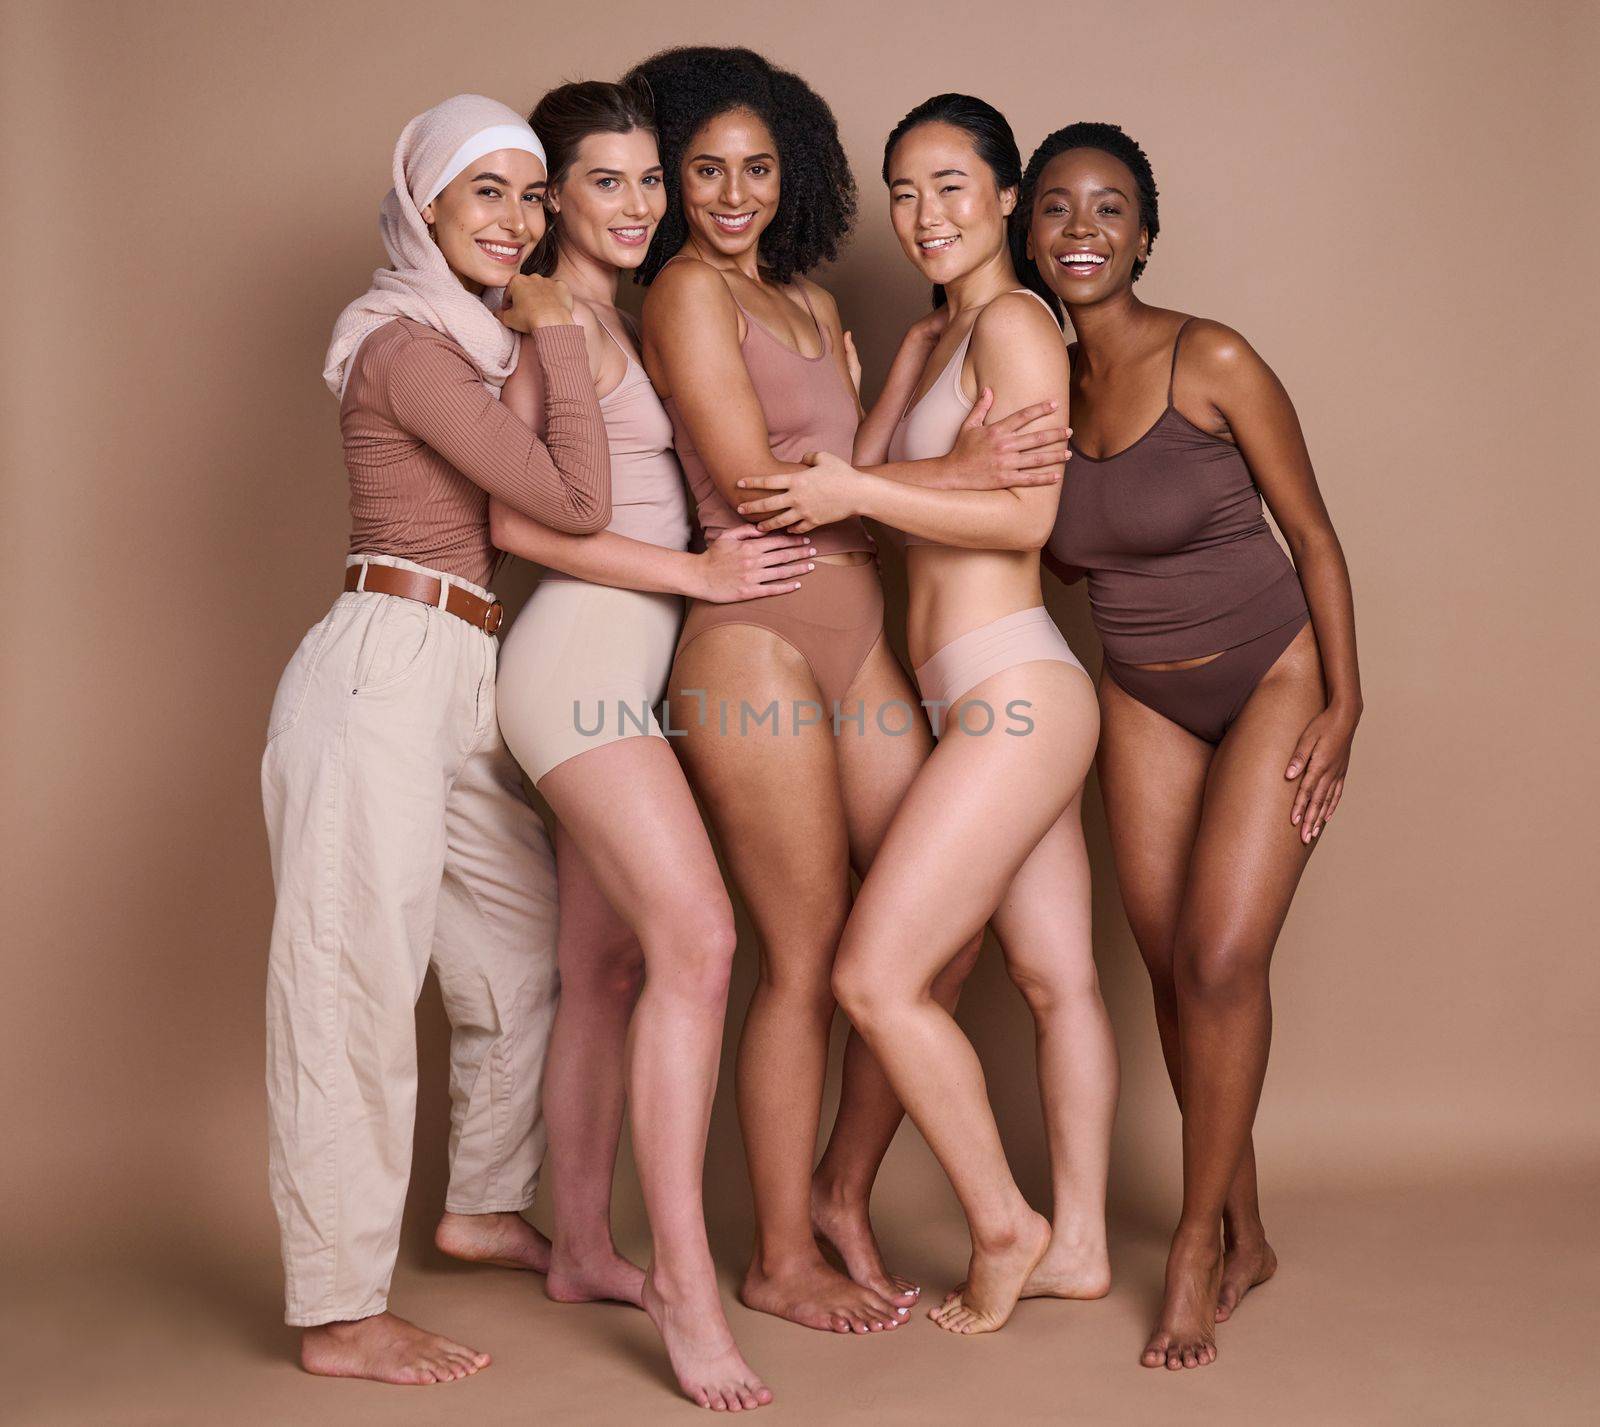 Beauty skincare, diversity and group of women in studio on a brown background. Underwear, makeup cosmetics and portrait of different female models posing for self love, empowerment or body positivity by YuriArcurs